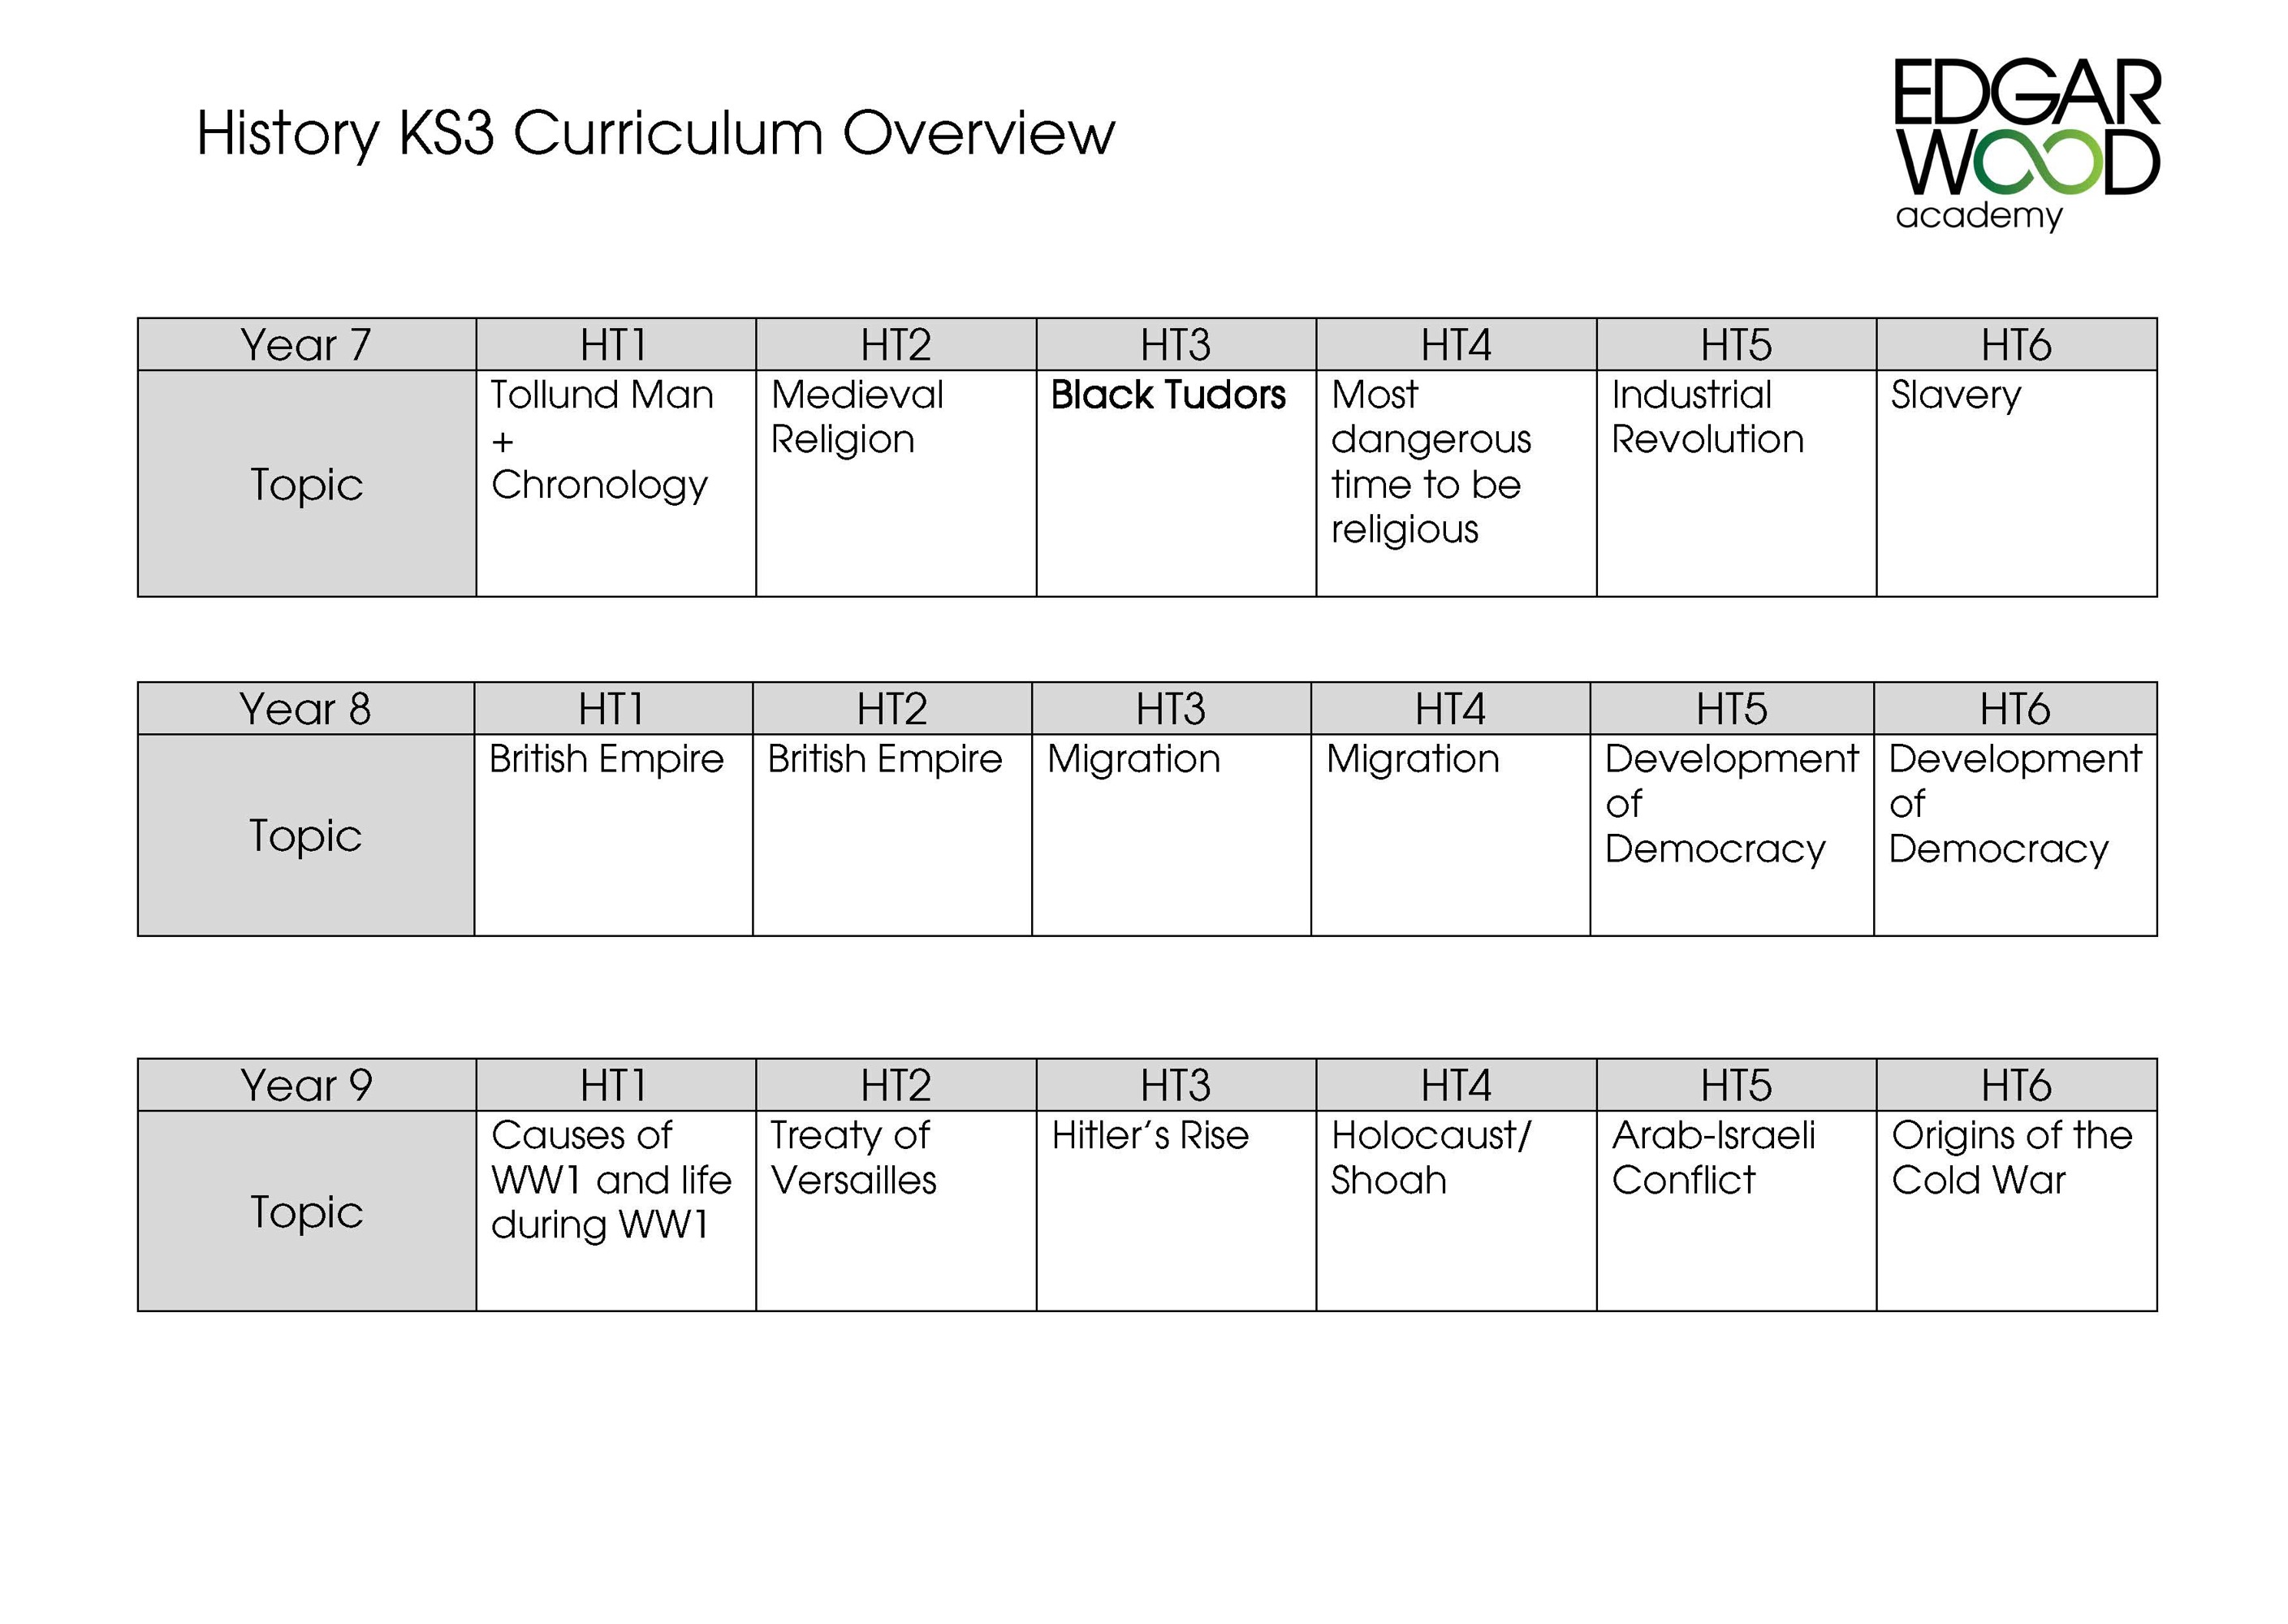 History Curriculum Overview